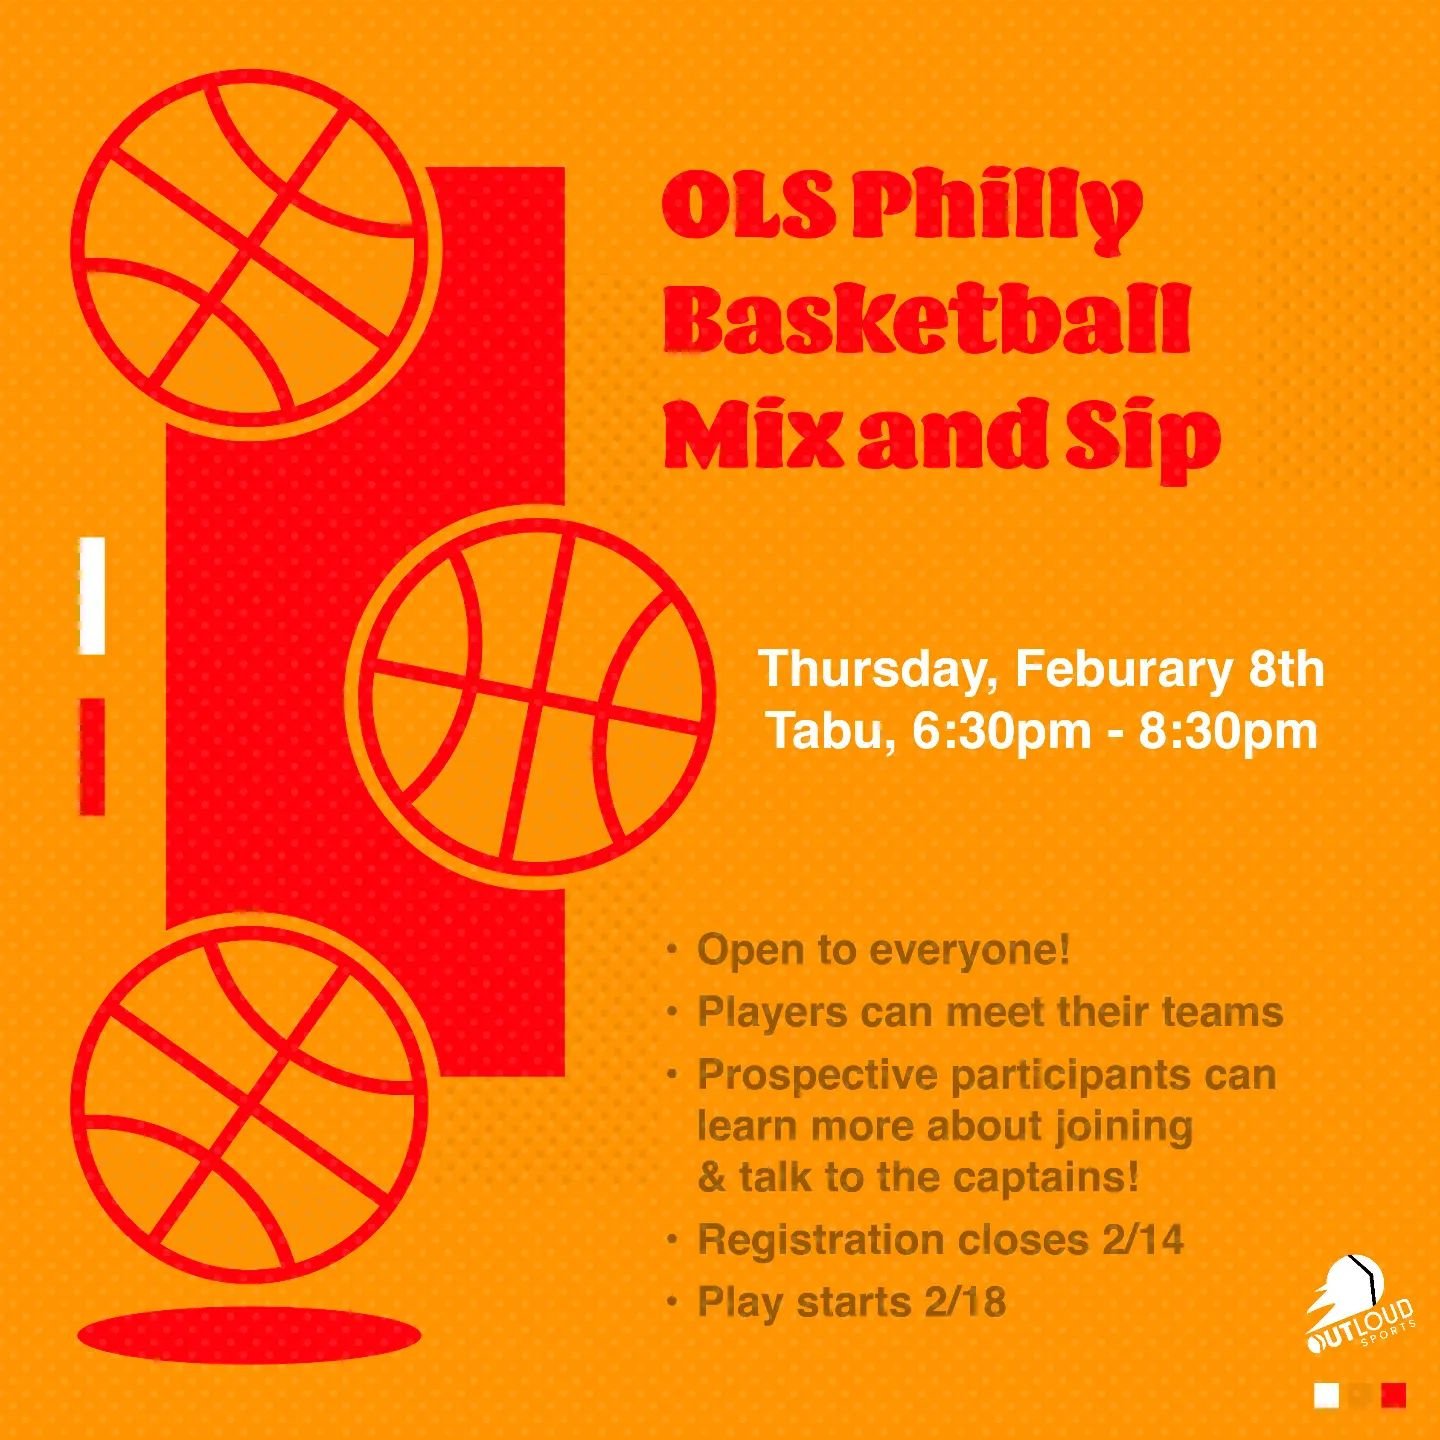 Excited for this basketball season!! This week we have a mixer at tabu where you can come out, meet your captain, meet other players and just learn more about the season! Games start the 18th!

Interested in playing or have a friend who might want to